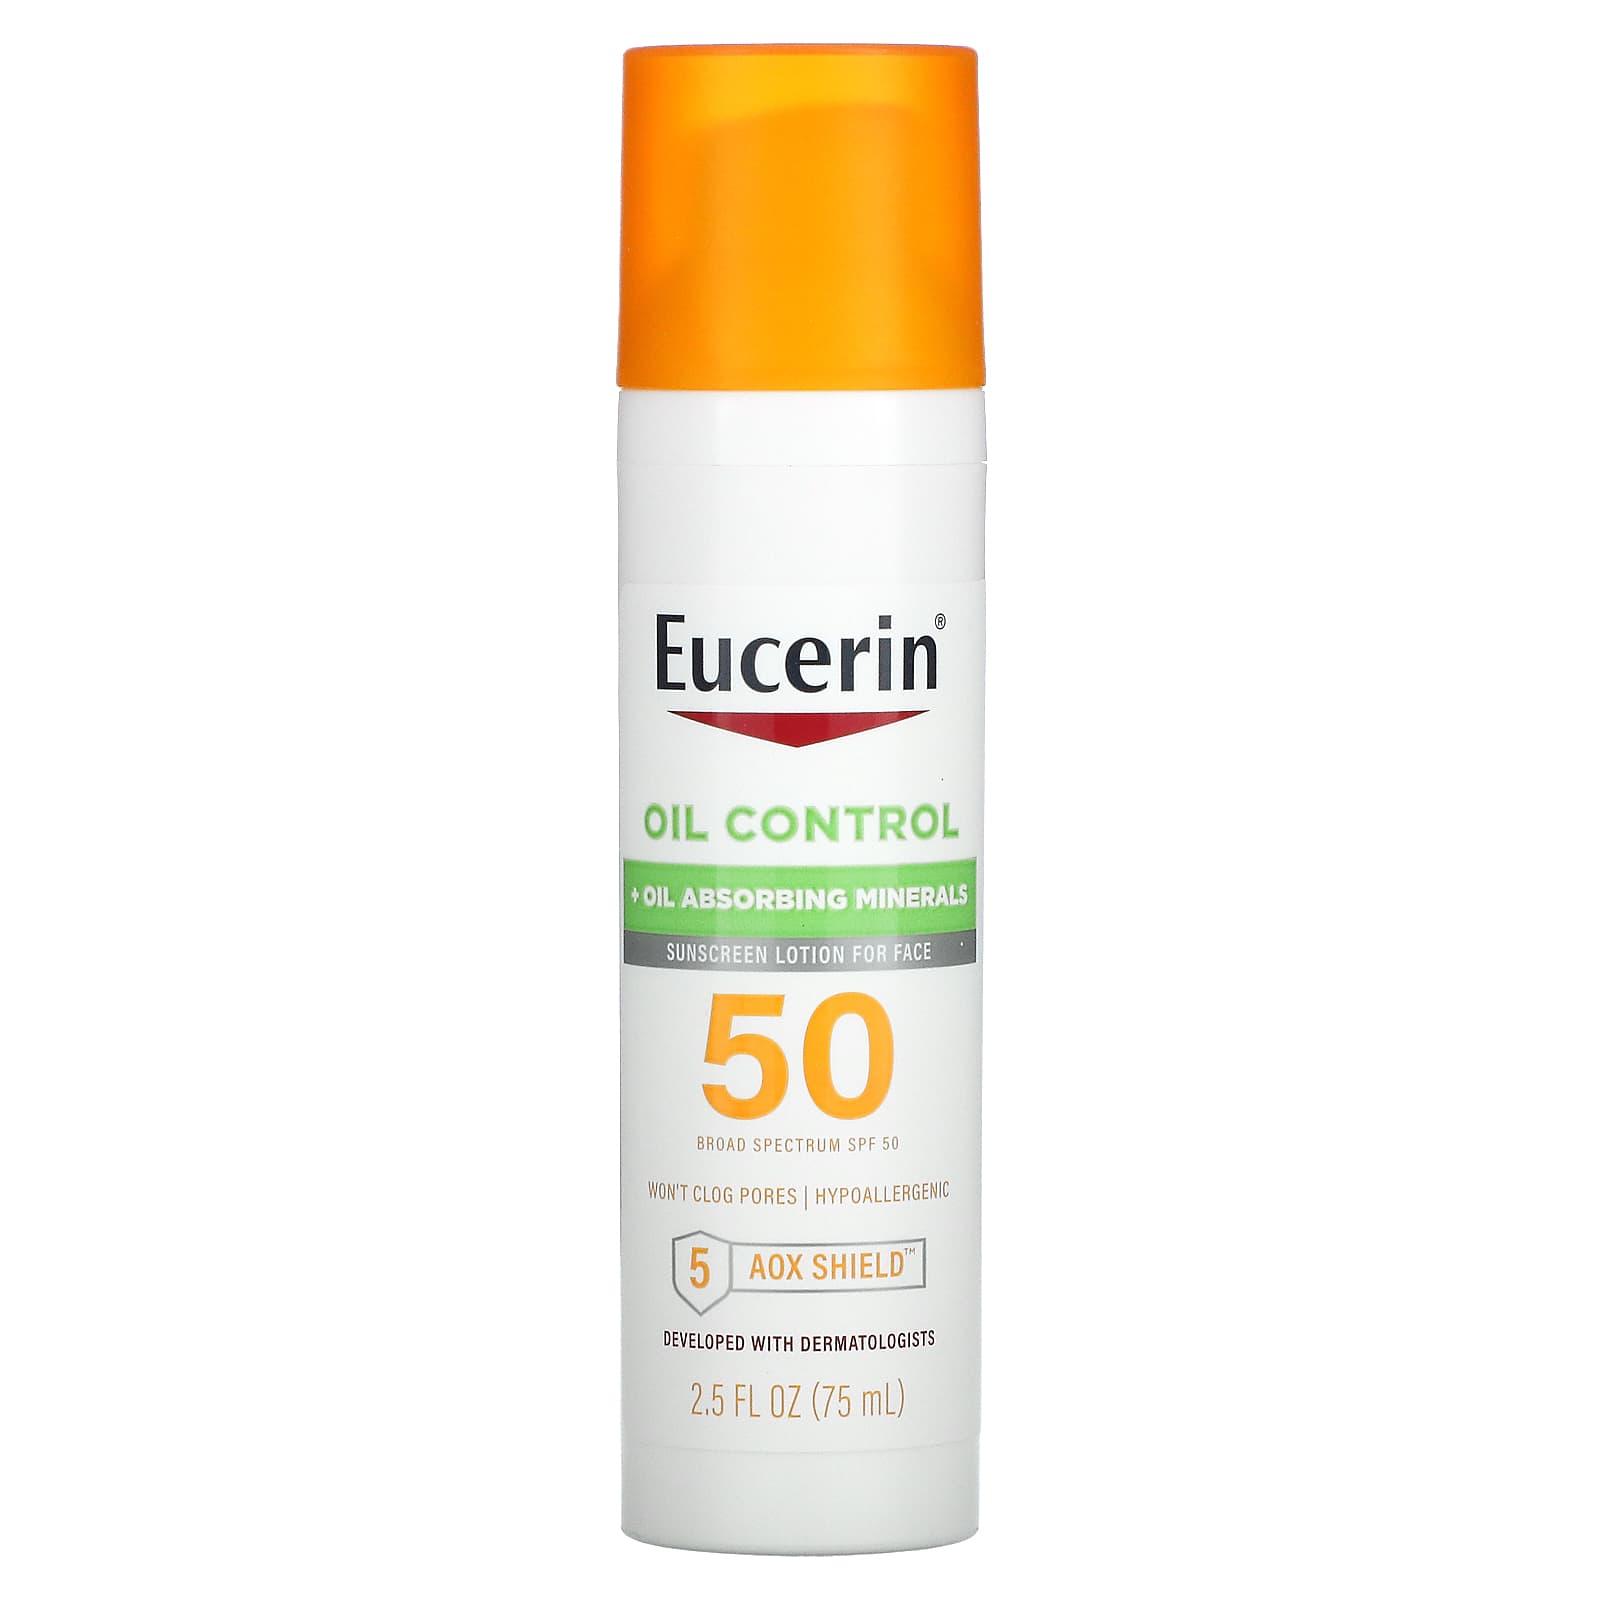 Oil Control SPF 50 Face Sunscreen Lotion with Oil Absorbing Minerals